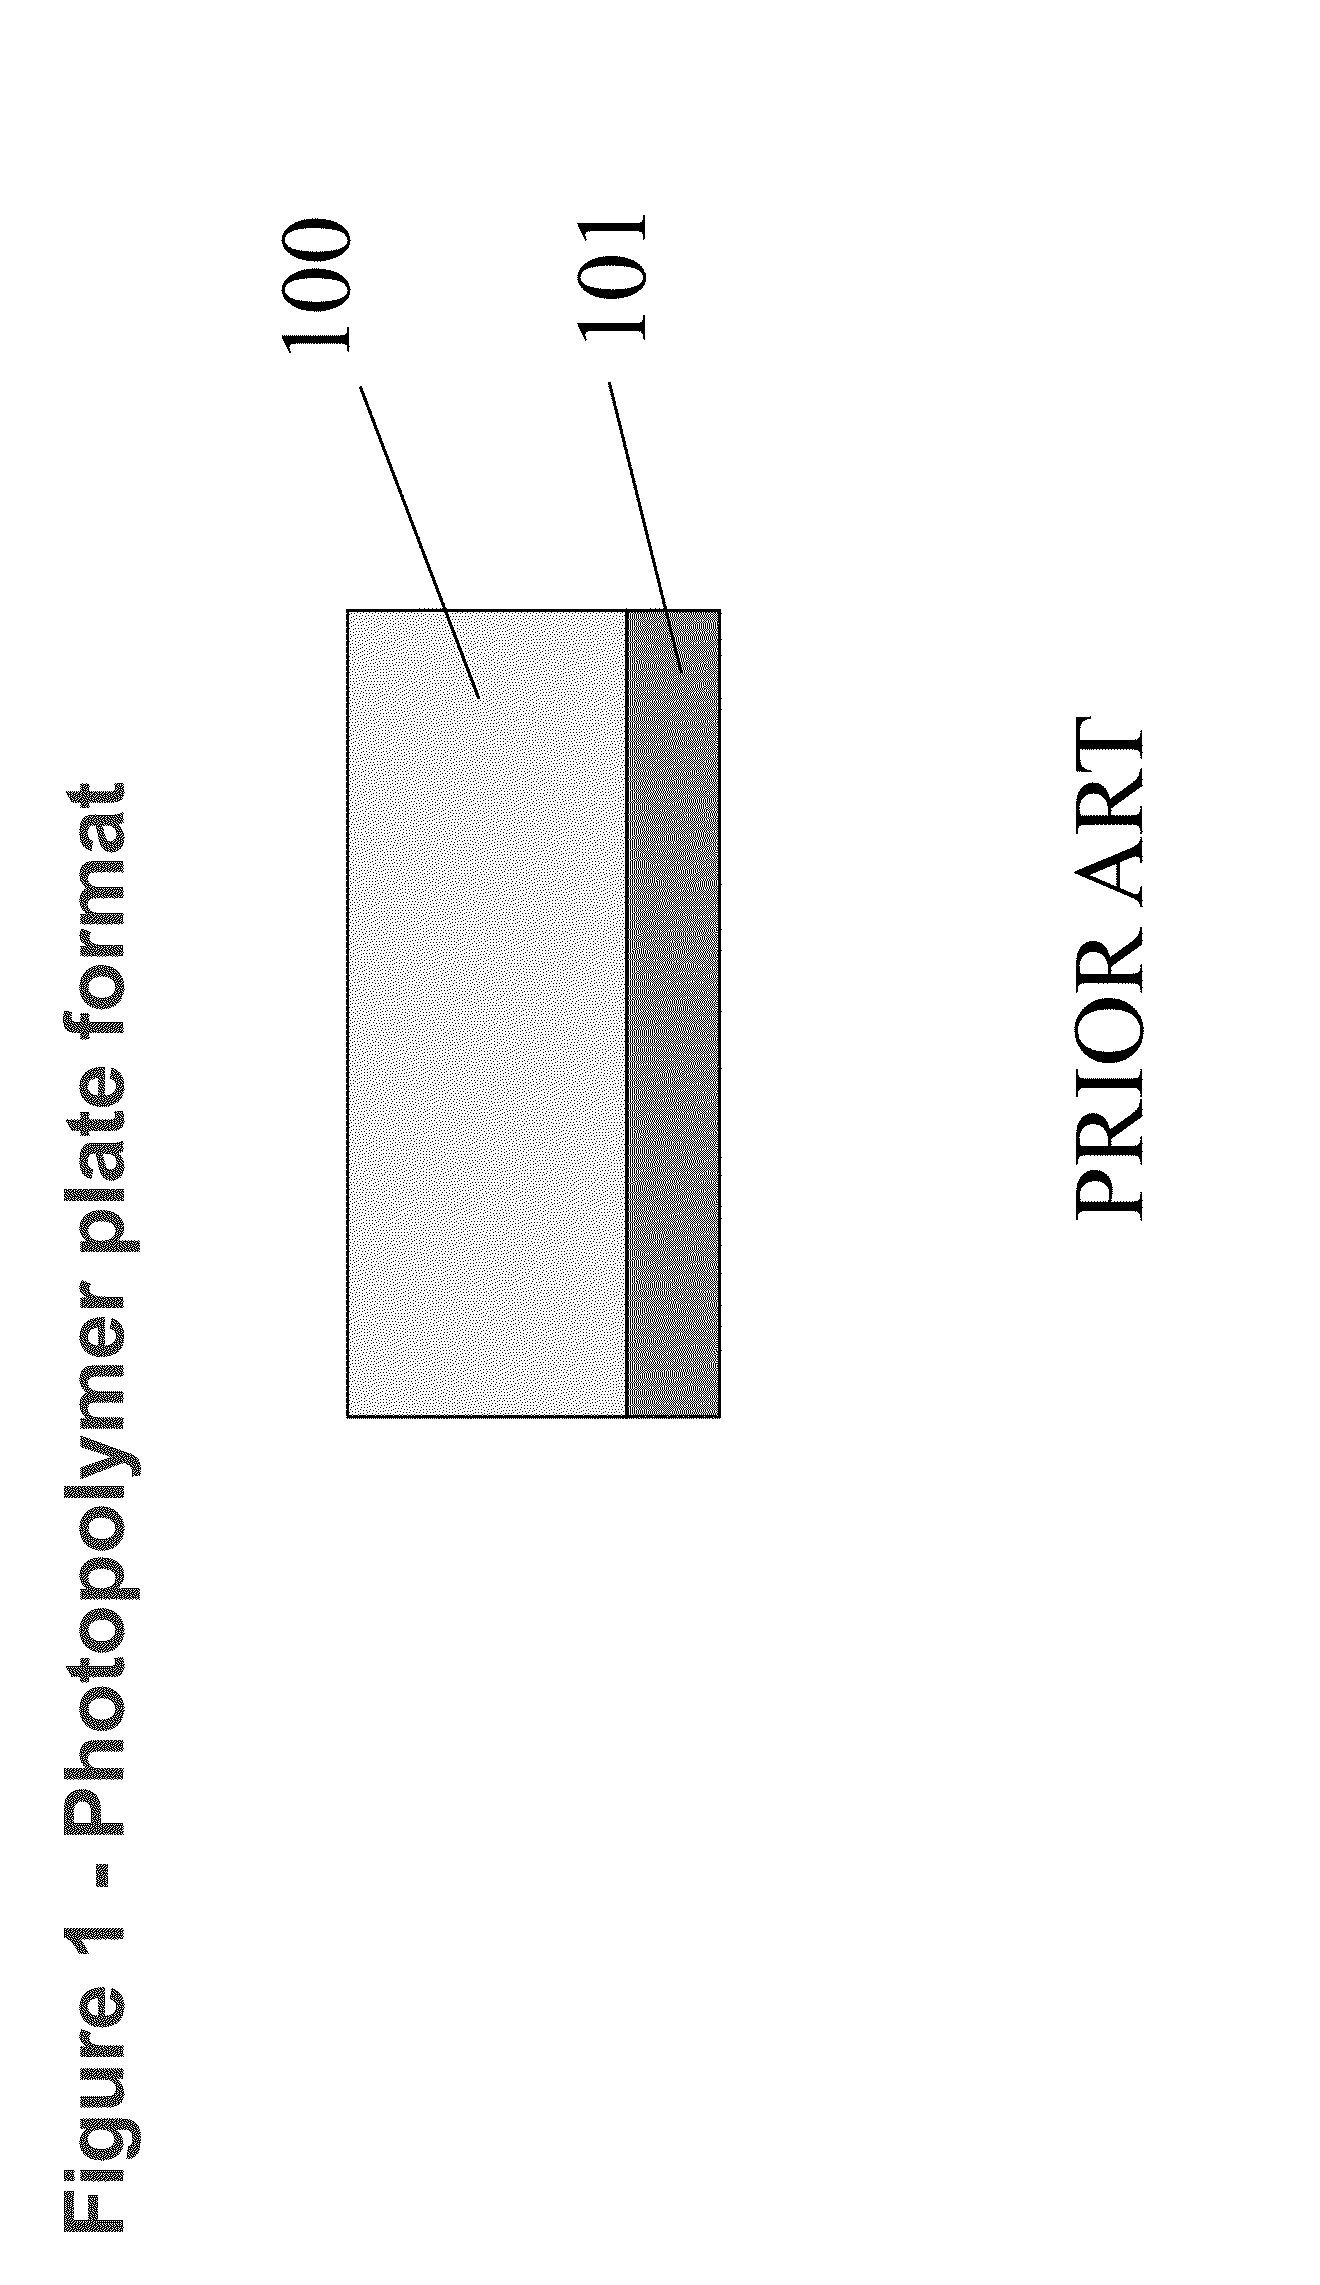 System for forming security markings using structured microdots